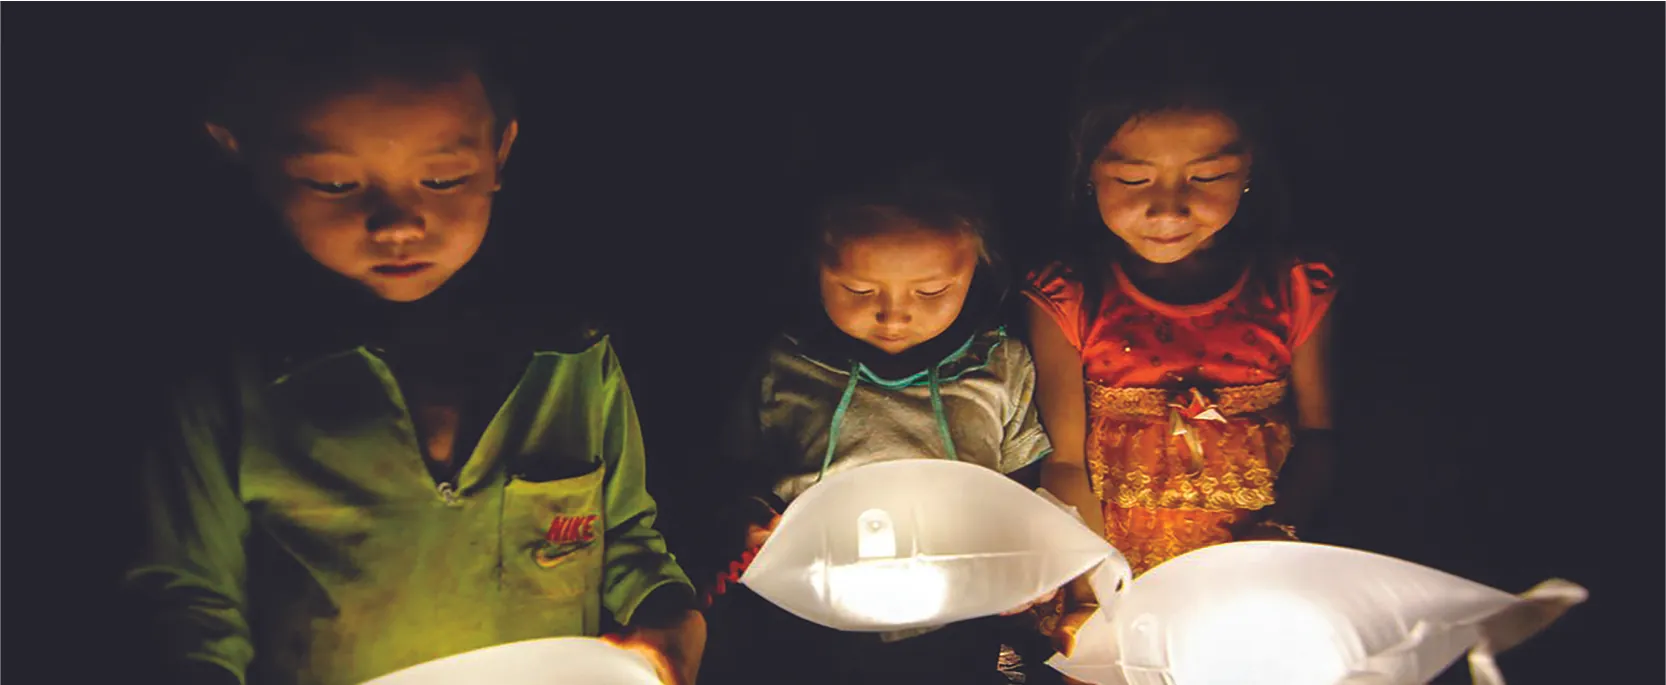 Three children hold white pillow-like objects that emanate light.